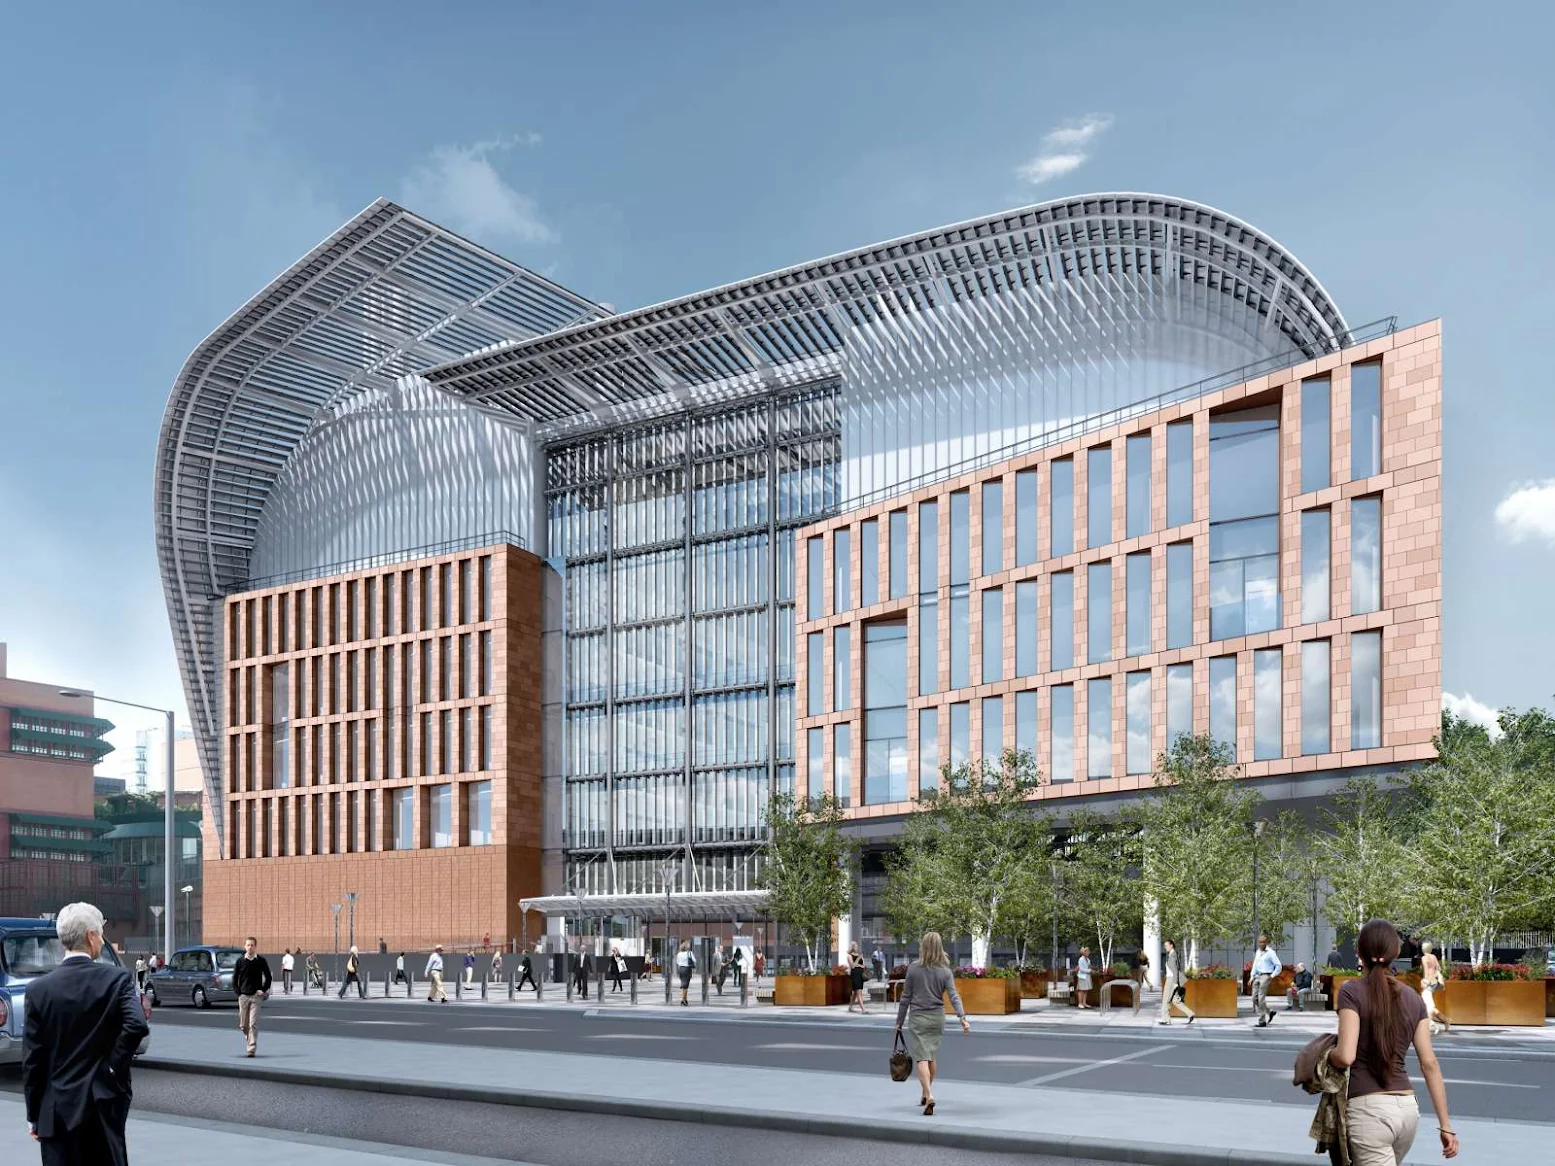 The Francis Crick Institute by HOK